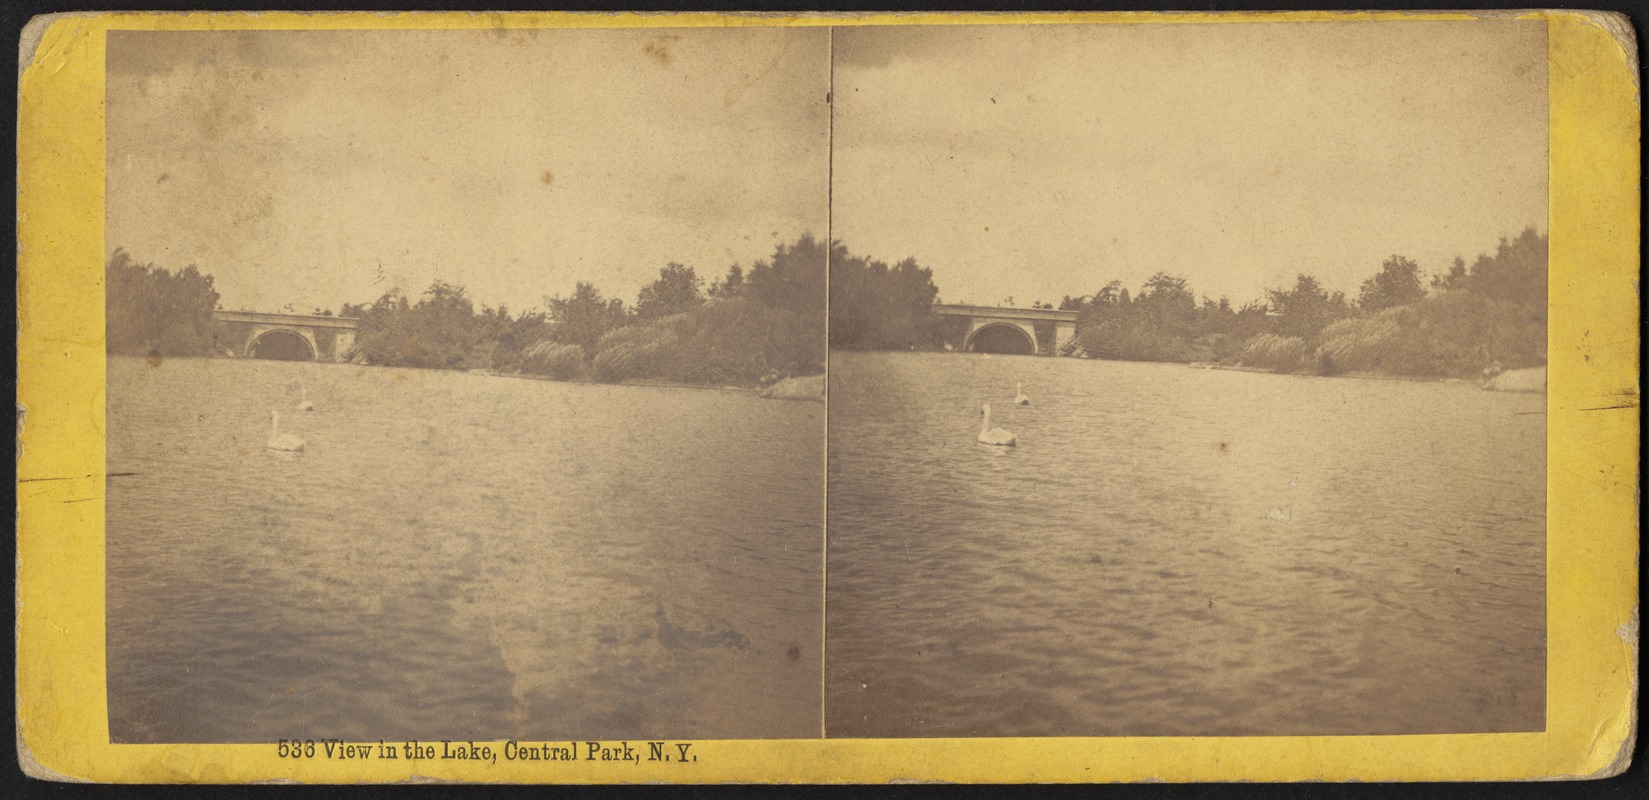 View in the lake, Central Park, N.Y.